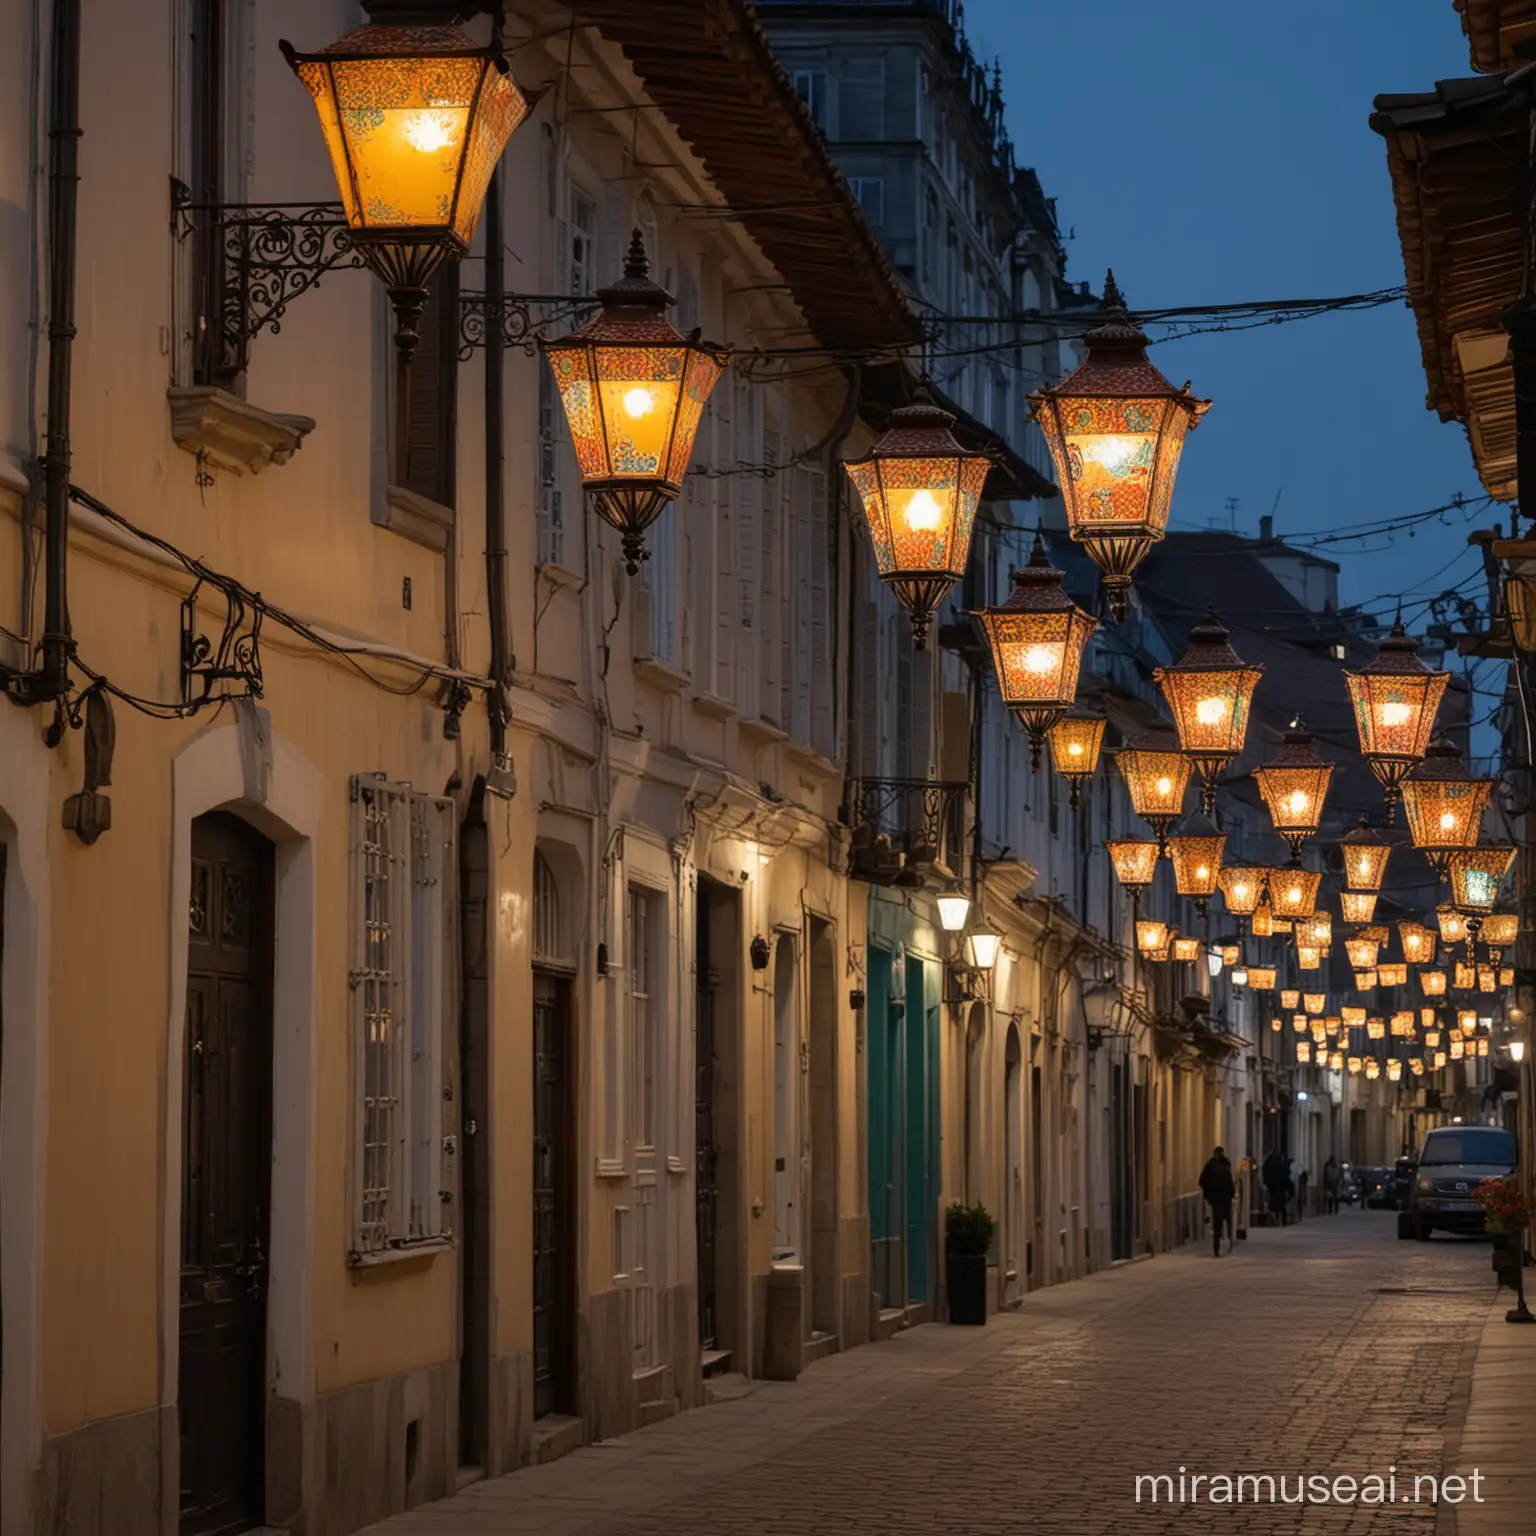 Historic Street Ambiance with Patterned Lamp Shades